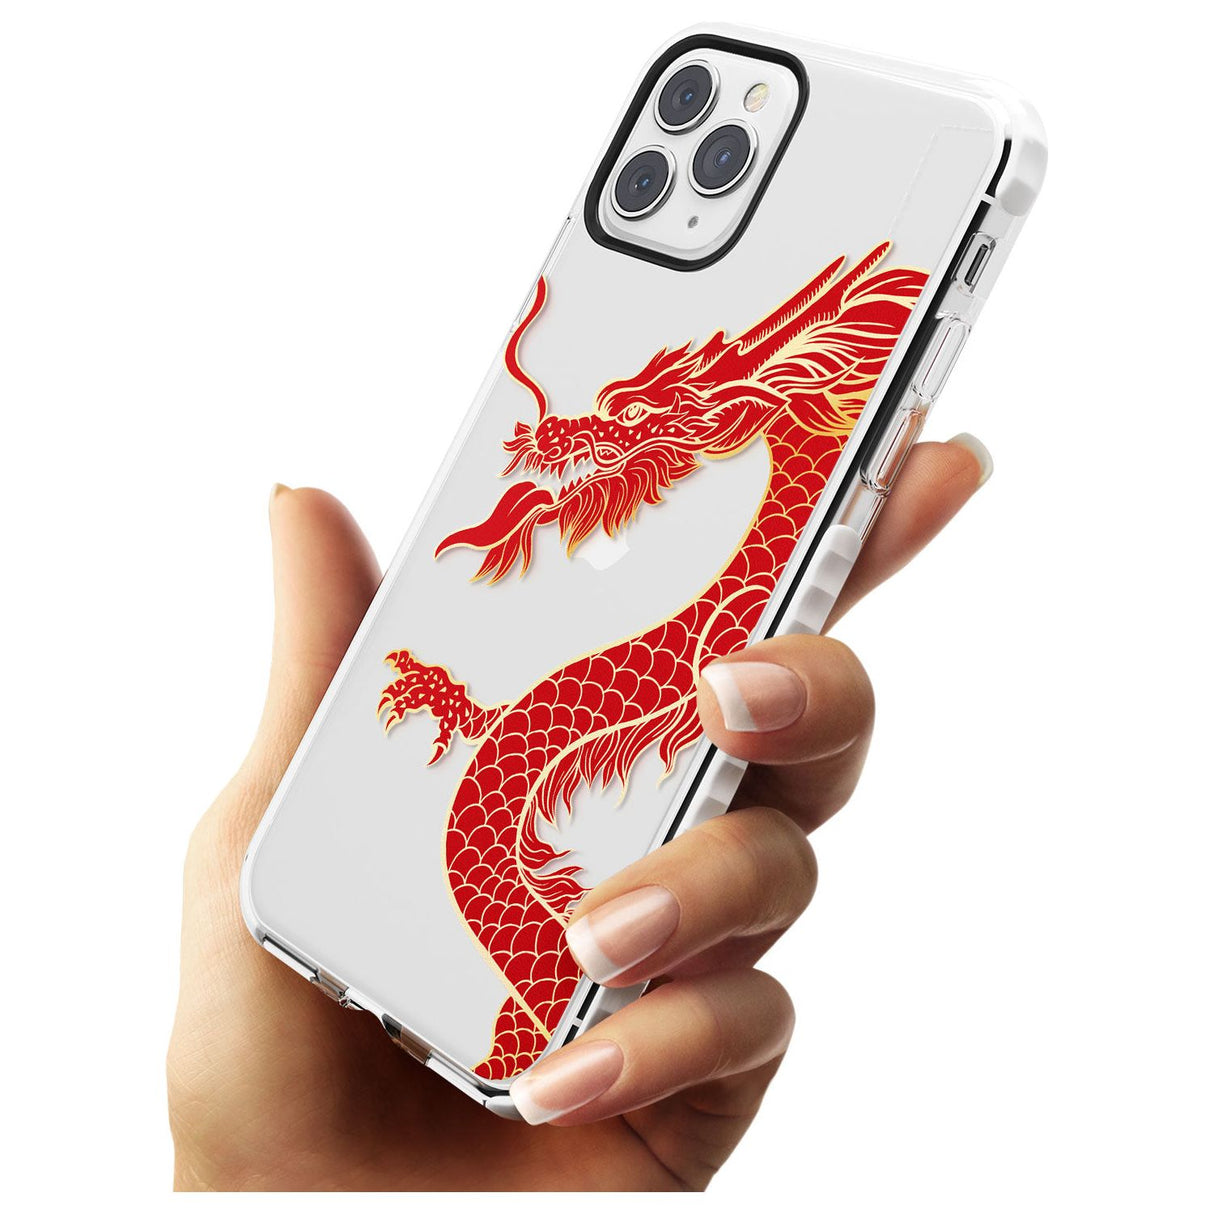 Large Black Dragon Impact Phone Case for iPhone 11 Pro Max